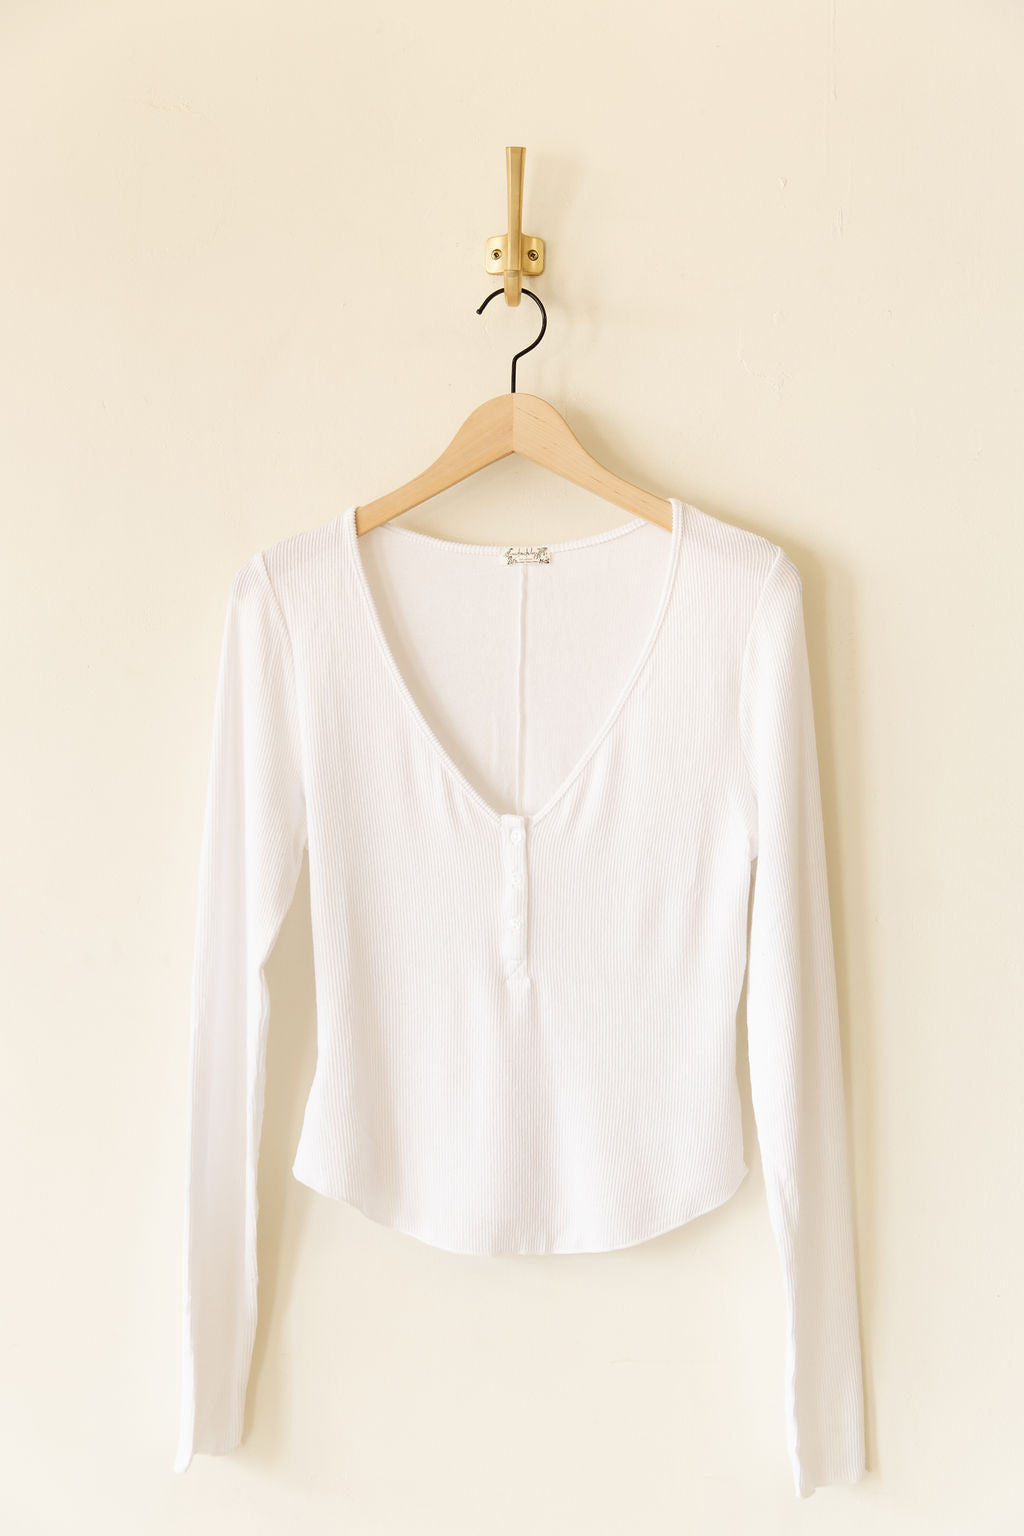 Keep It Basic Layering Top by Free People